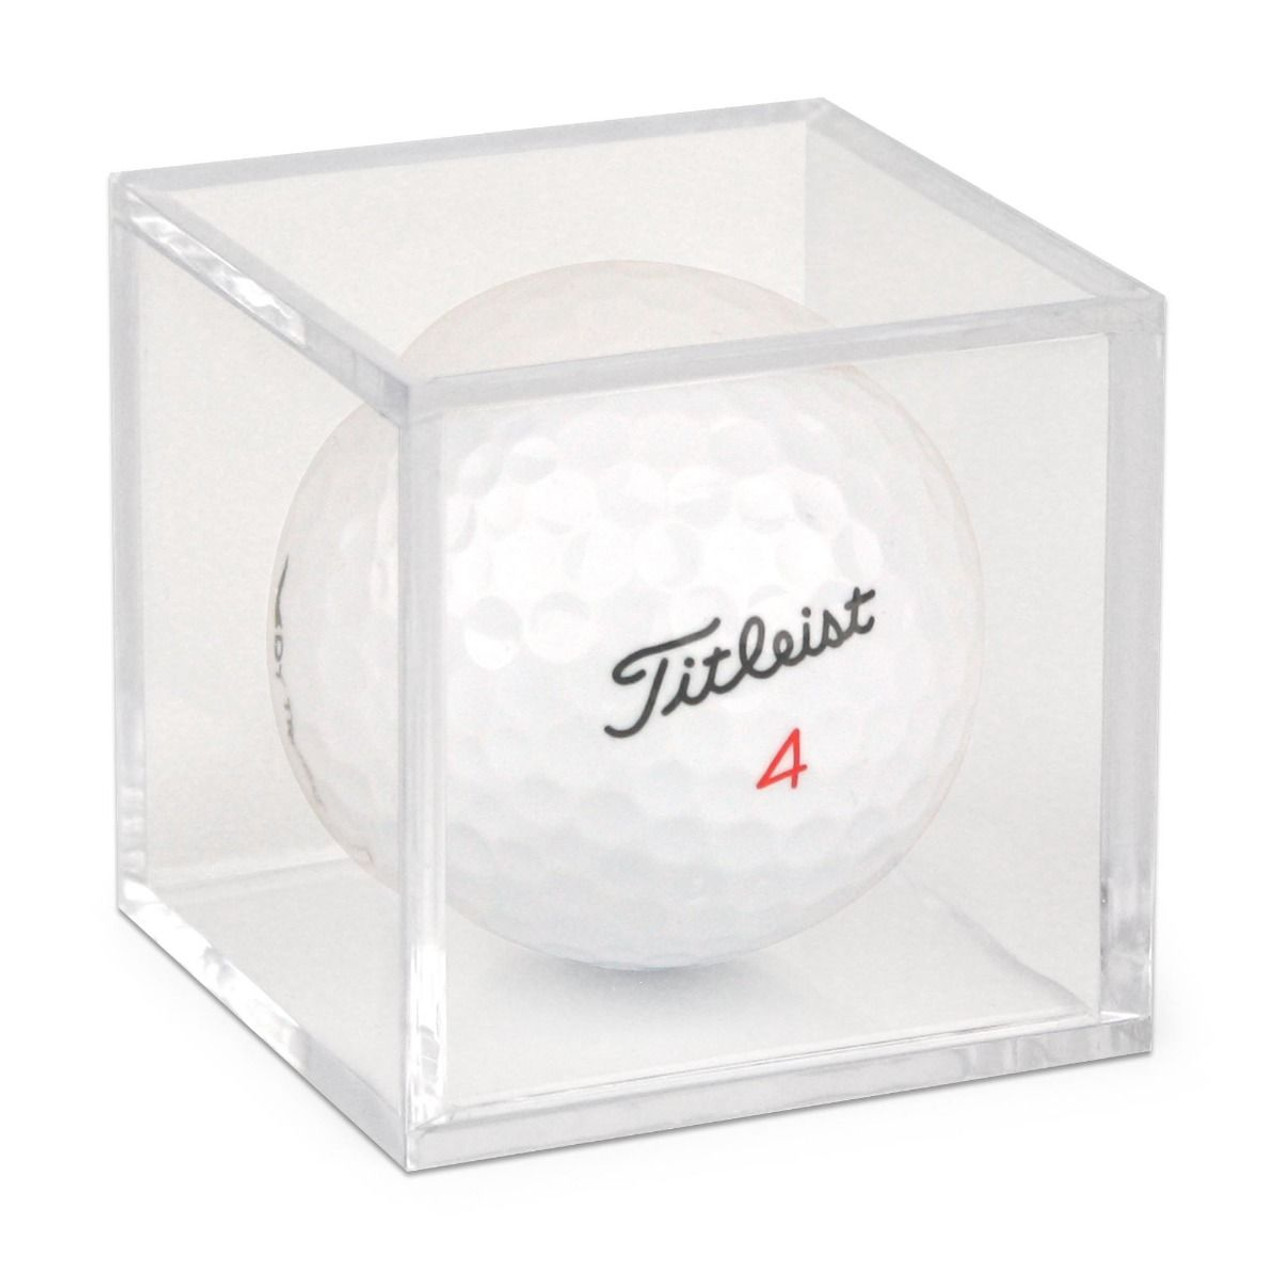 BCW Golf Ball Square / Case of 72